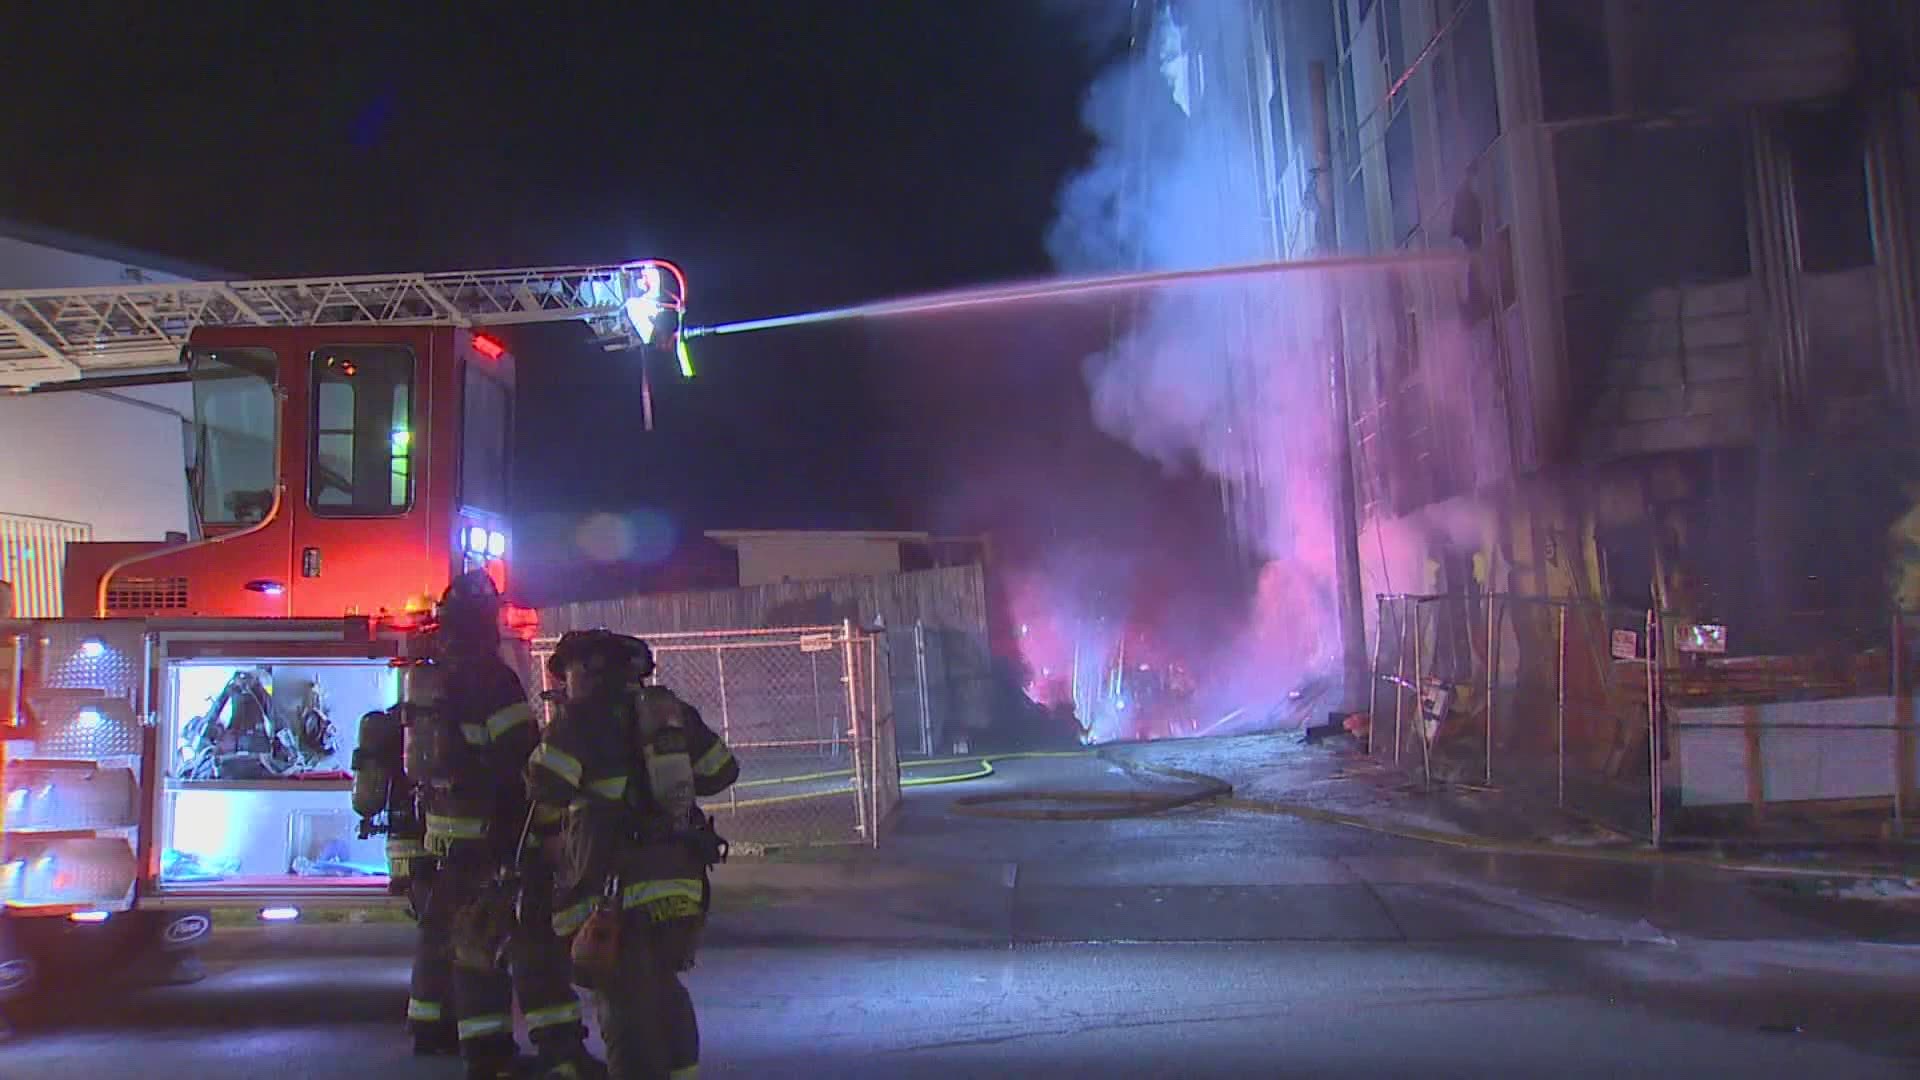 Seattle firefighters were called to two 2-alarm structure fires overnight Saturday, one in the Central District and another in Capitol Hill.